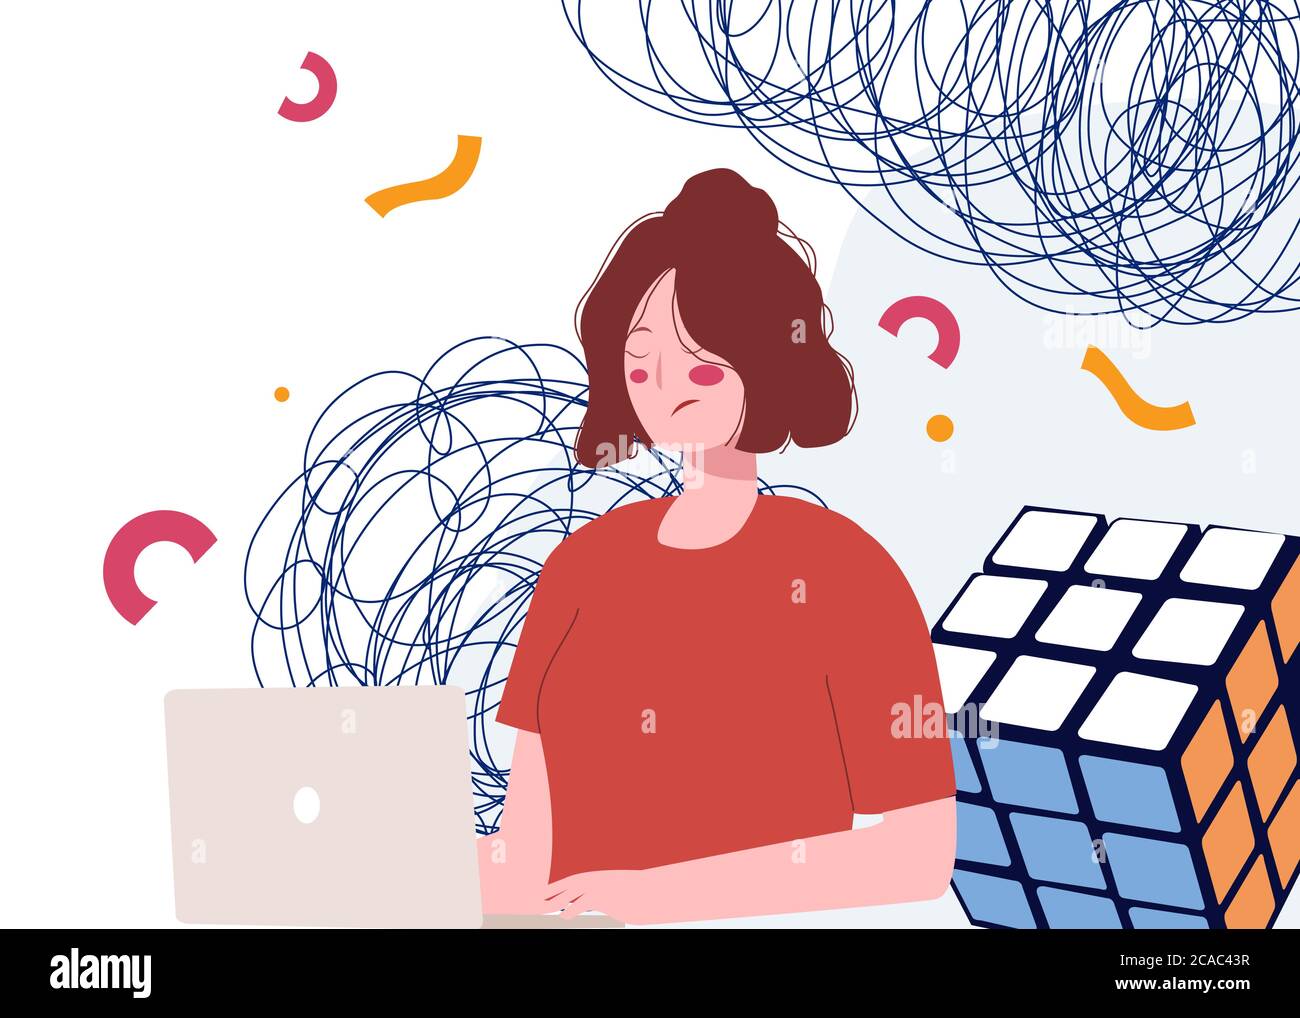 Women on laptop look unhappy background of rubik's doodle confused economic crisis concept with flat cartoon style v Stock Vector